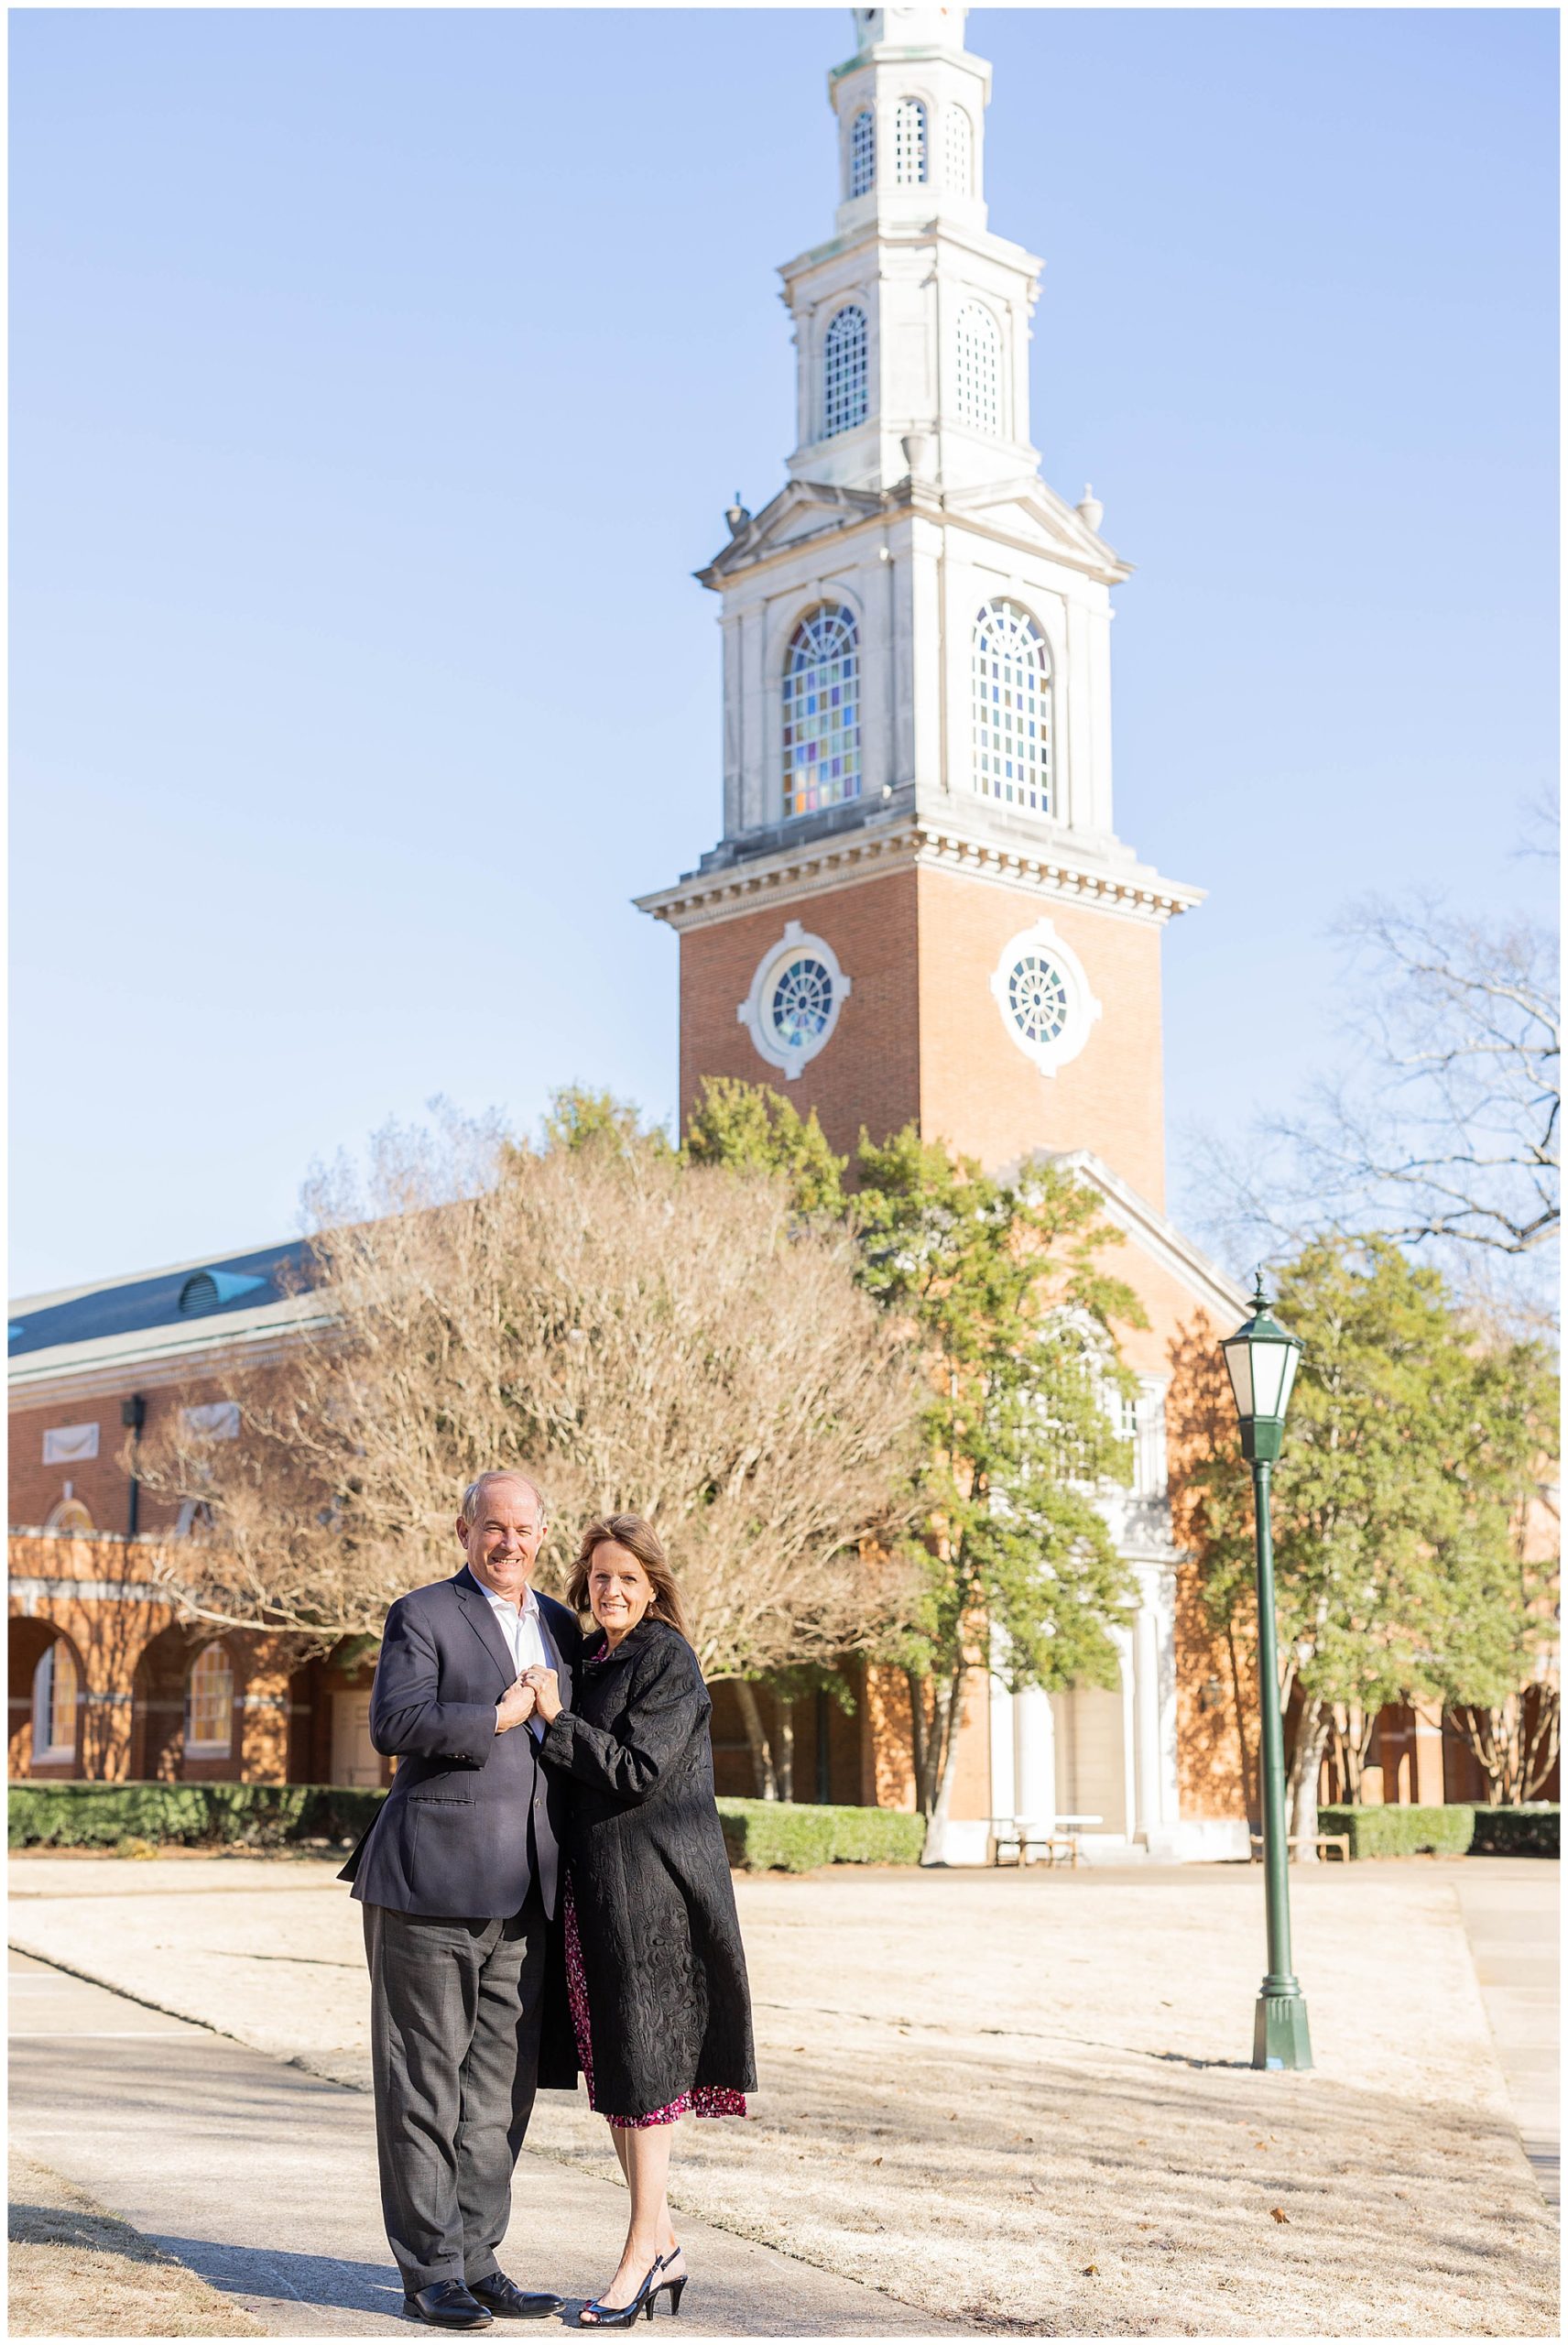 Eleanor Stenner Photography - a Birmingham, AL wedding photographer - photographs Claude & Connie at the Vulcan statue and Samford University for their engagement photos.